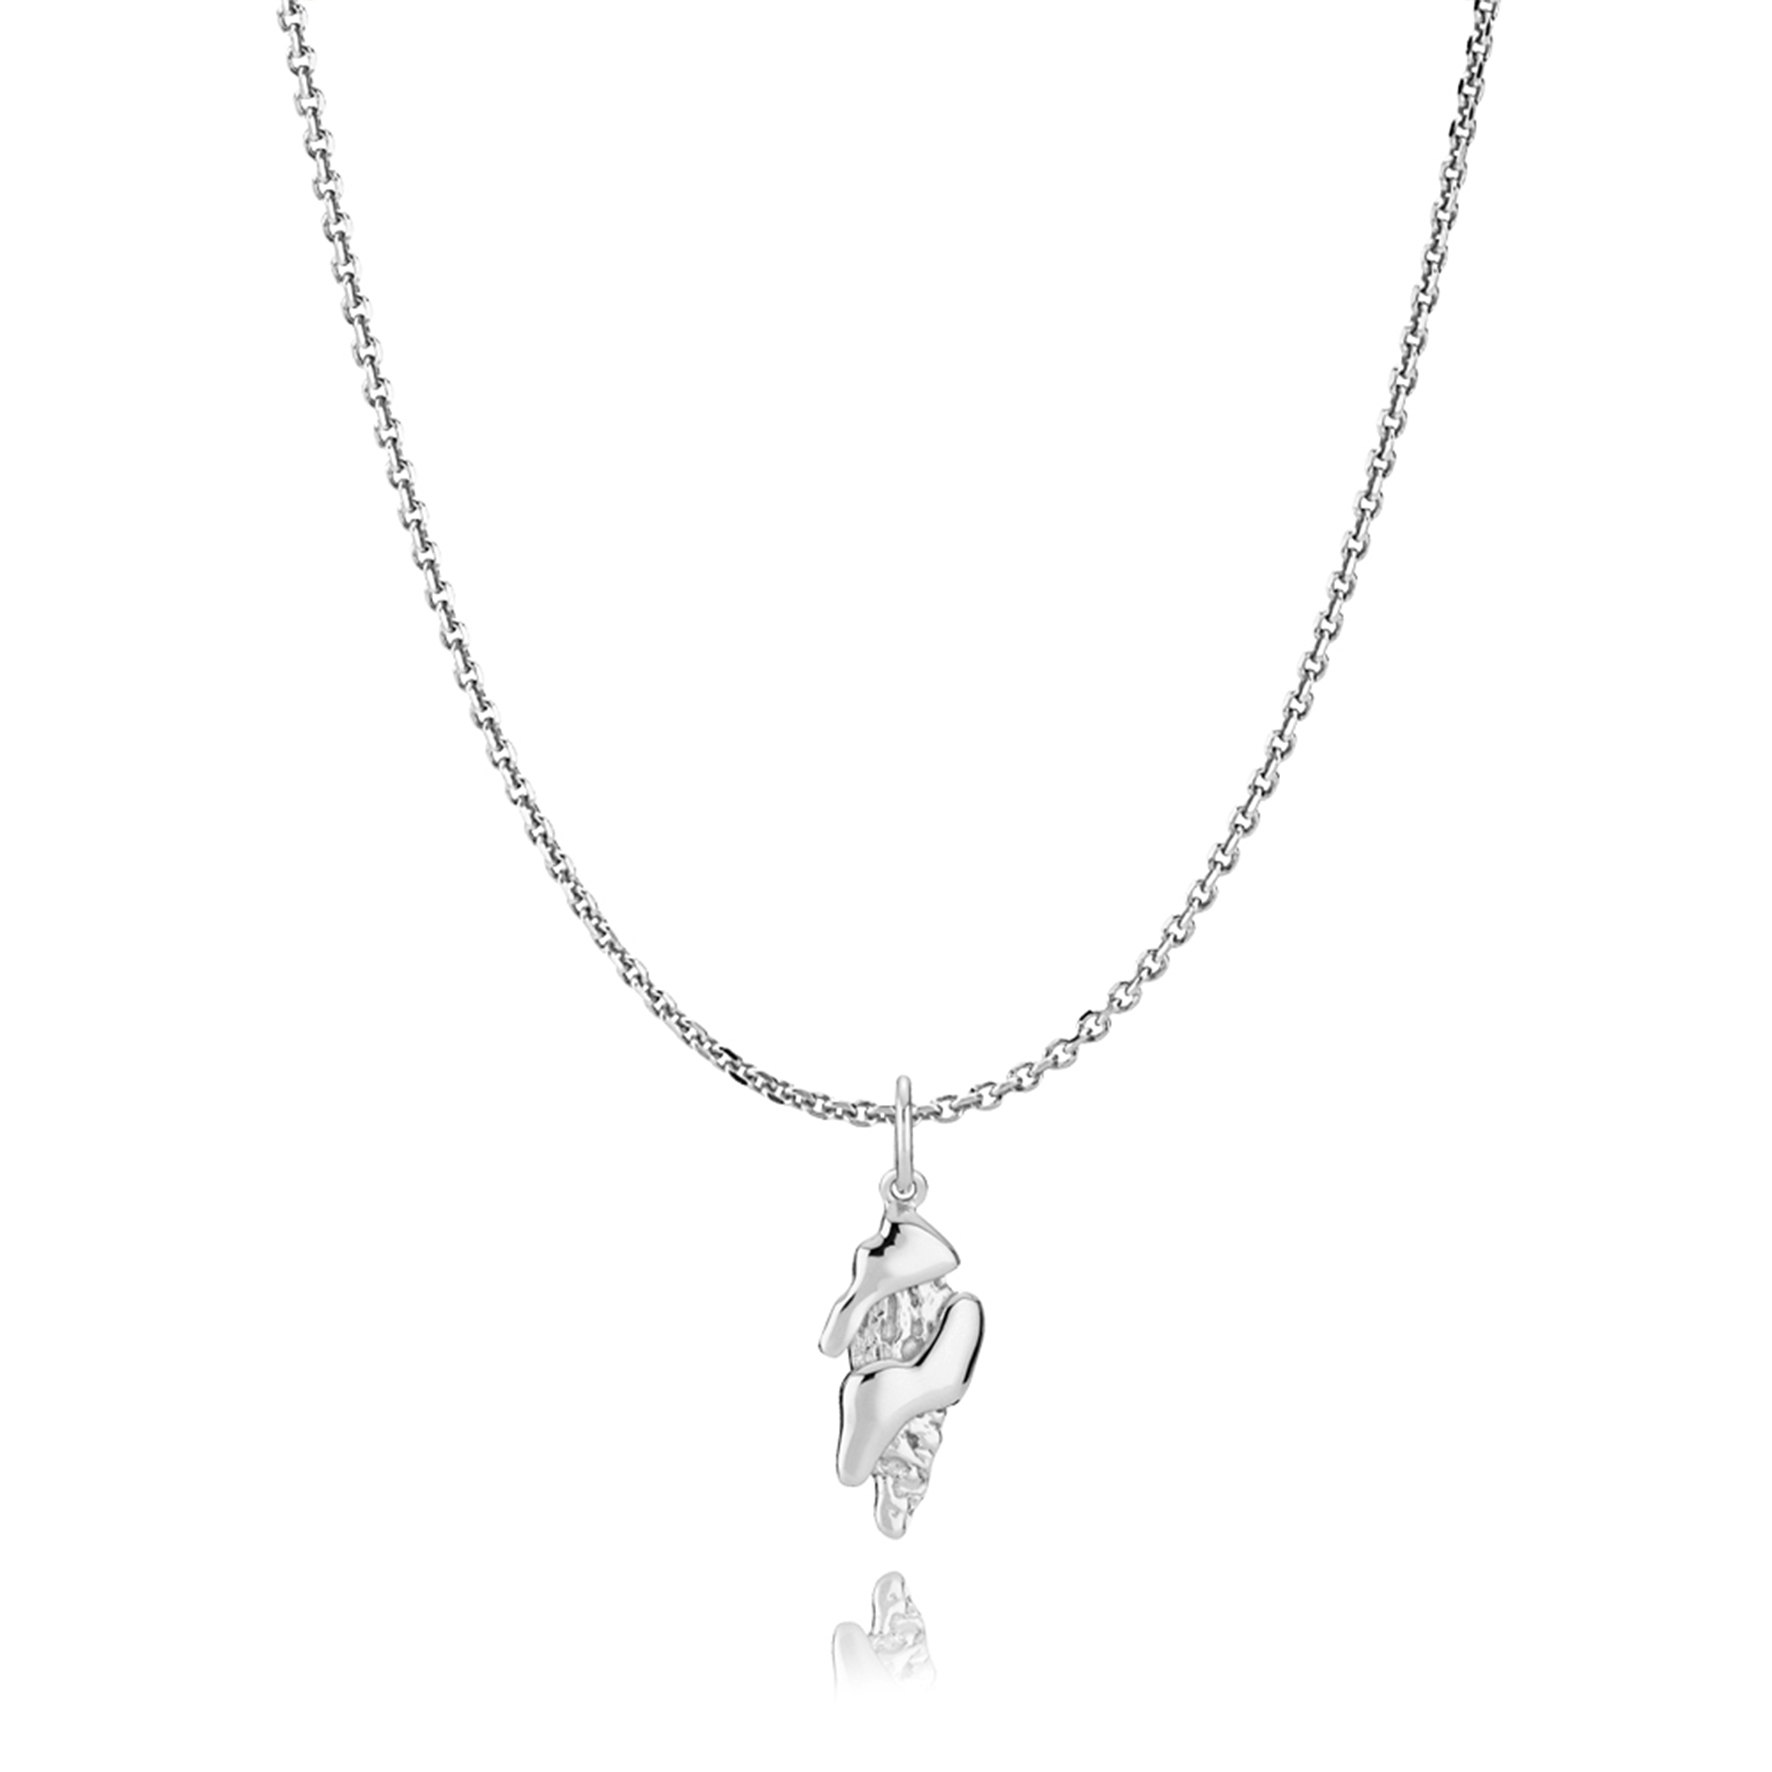 Josephine Livin By Sistie Necklace With Pendant från Sistie i Silver Sterling 925